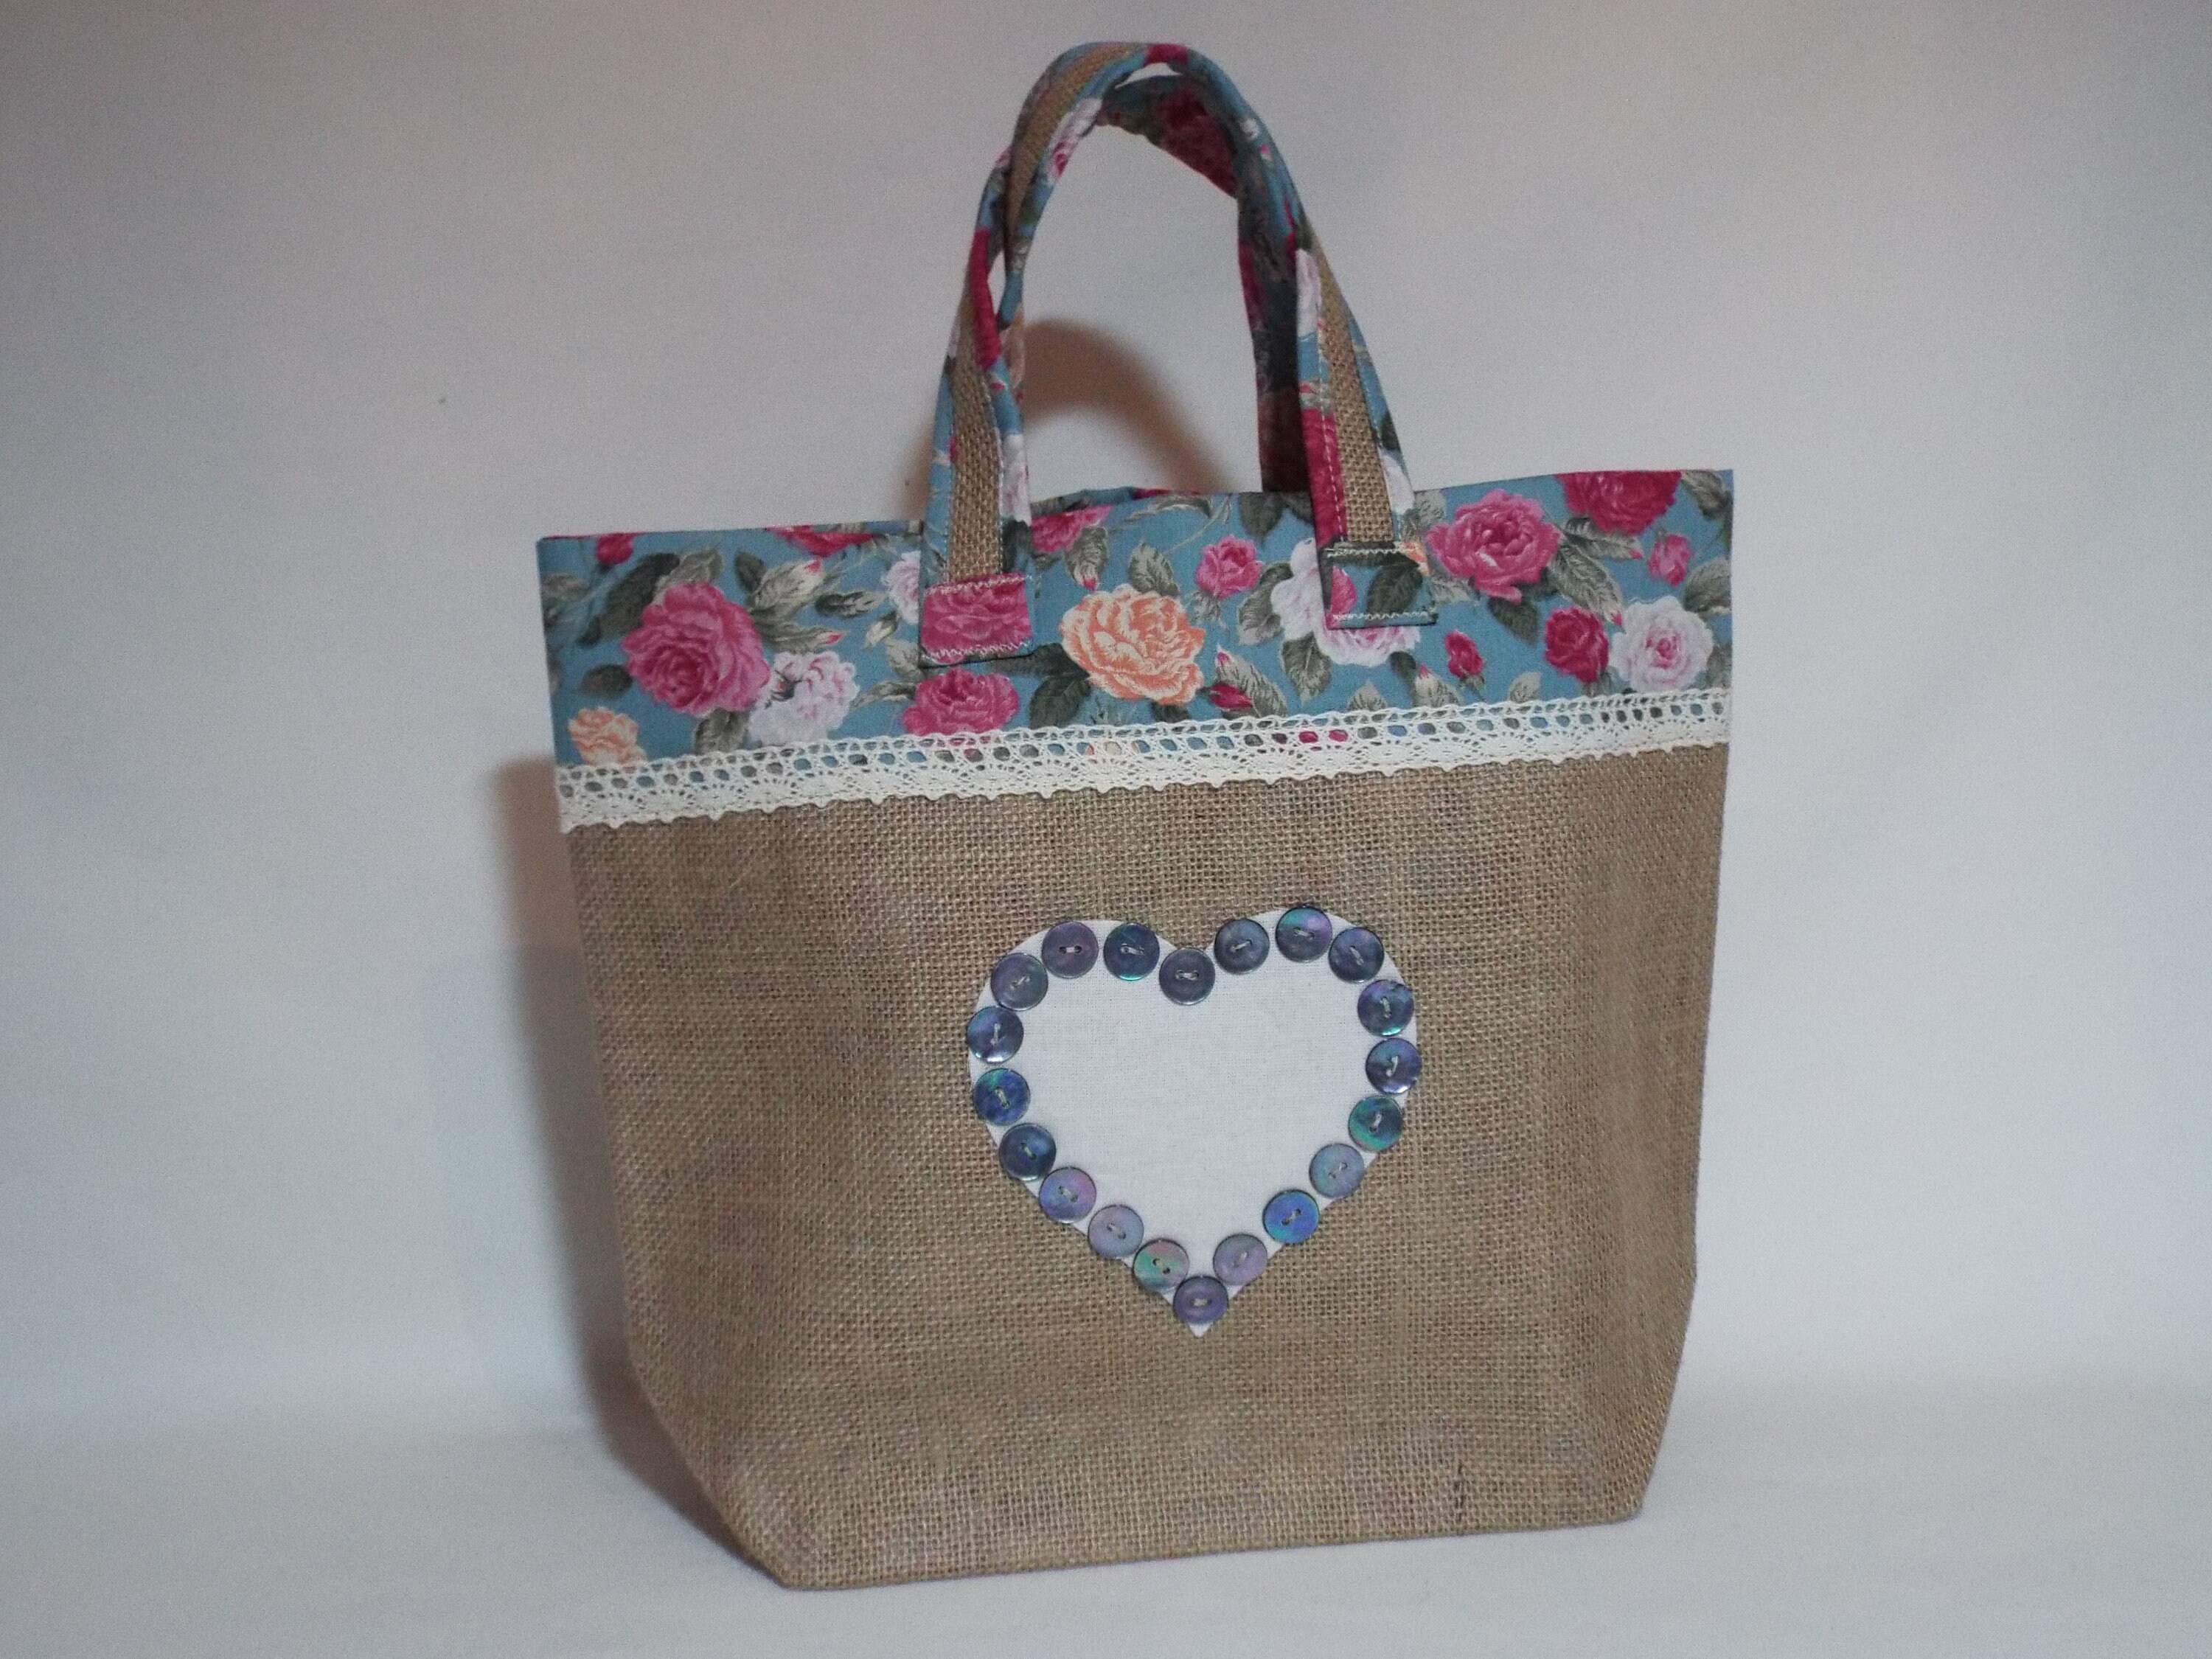 Hessian Tote Bag Fully Lined With Vintage Floral Cotton - Etsy UK